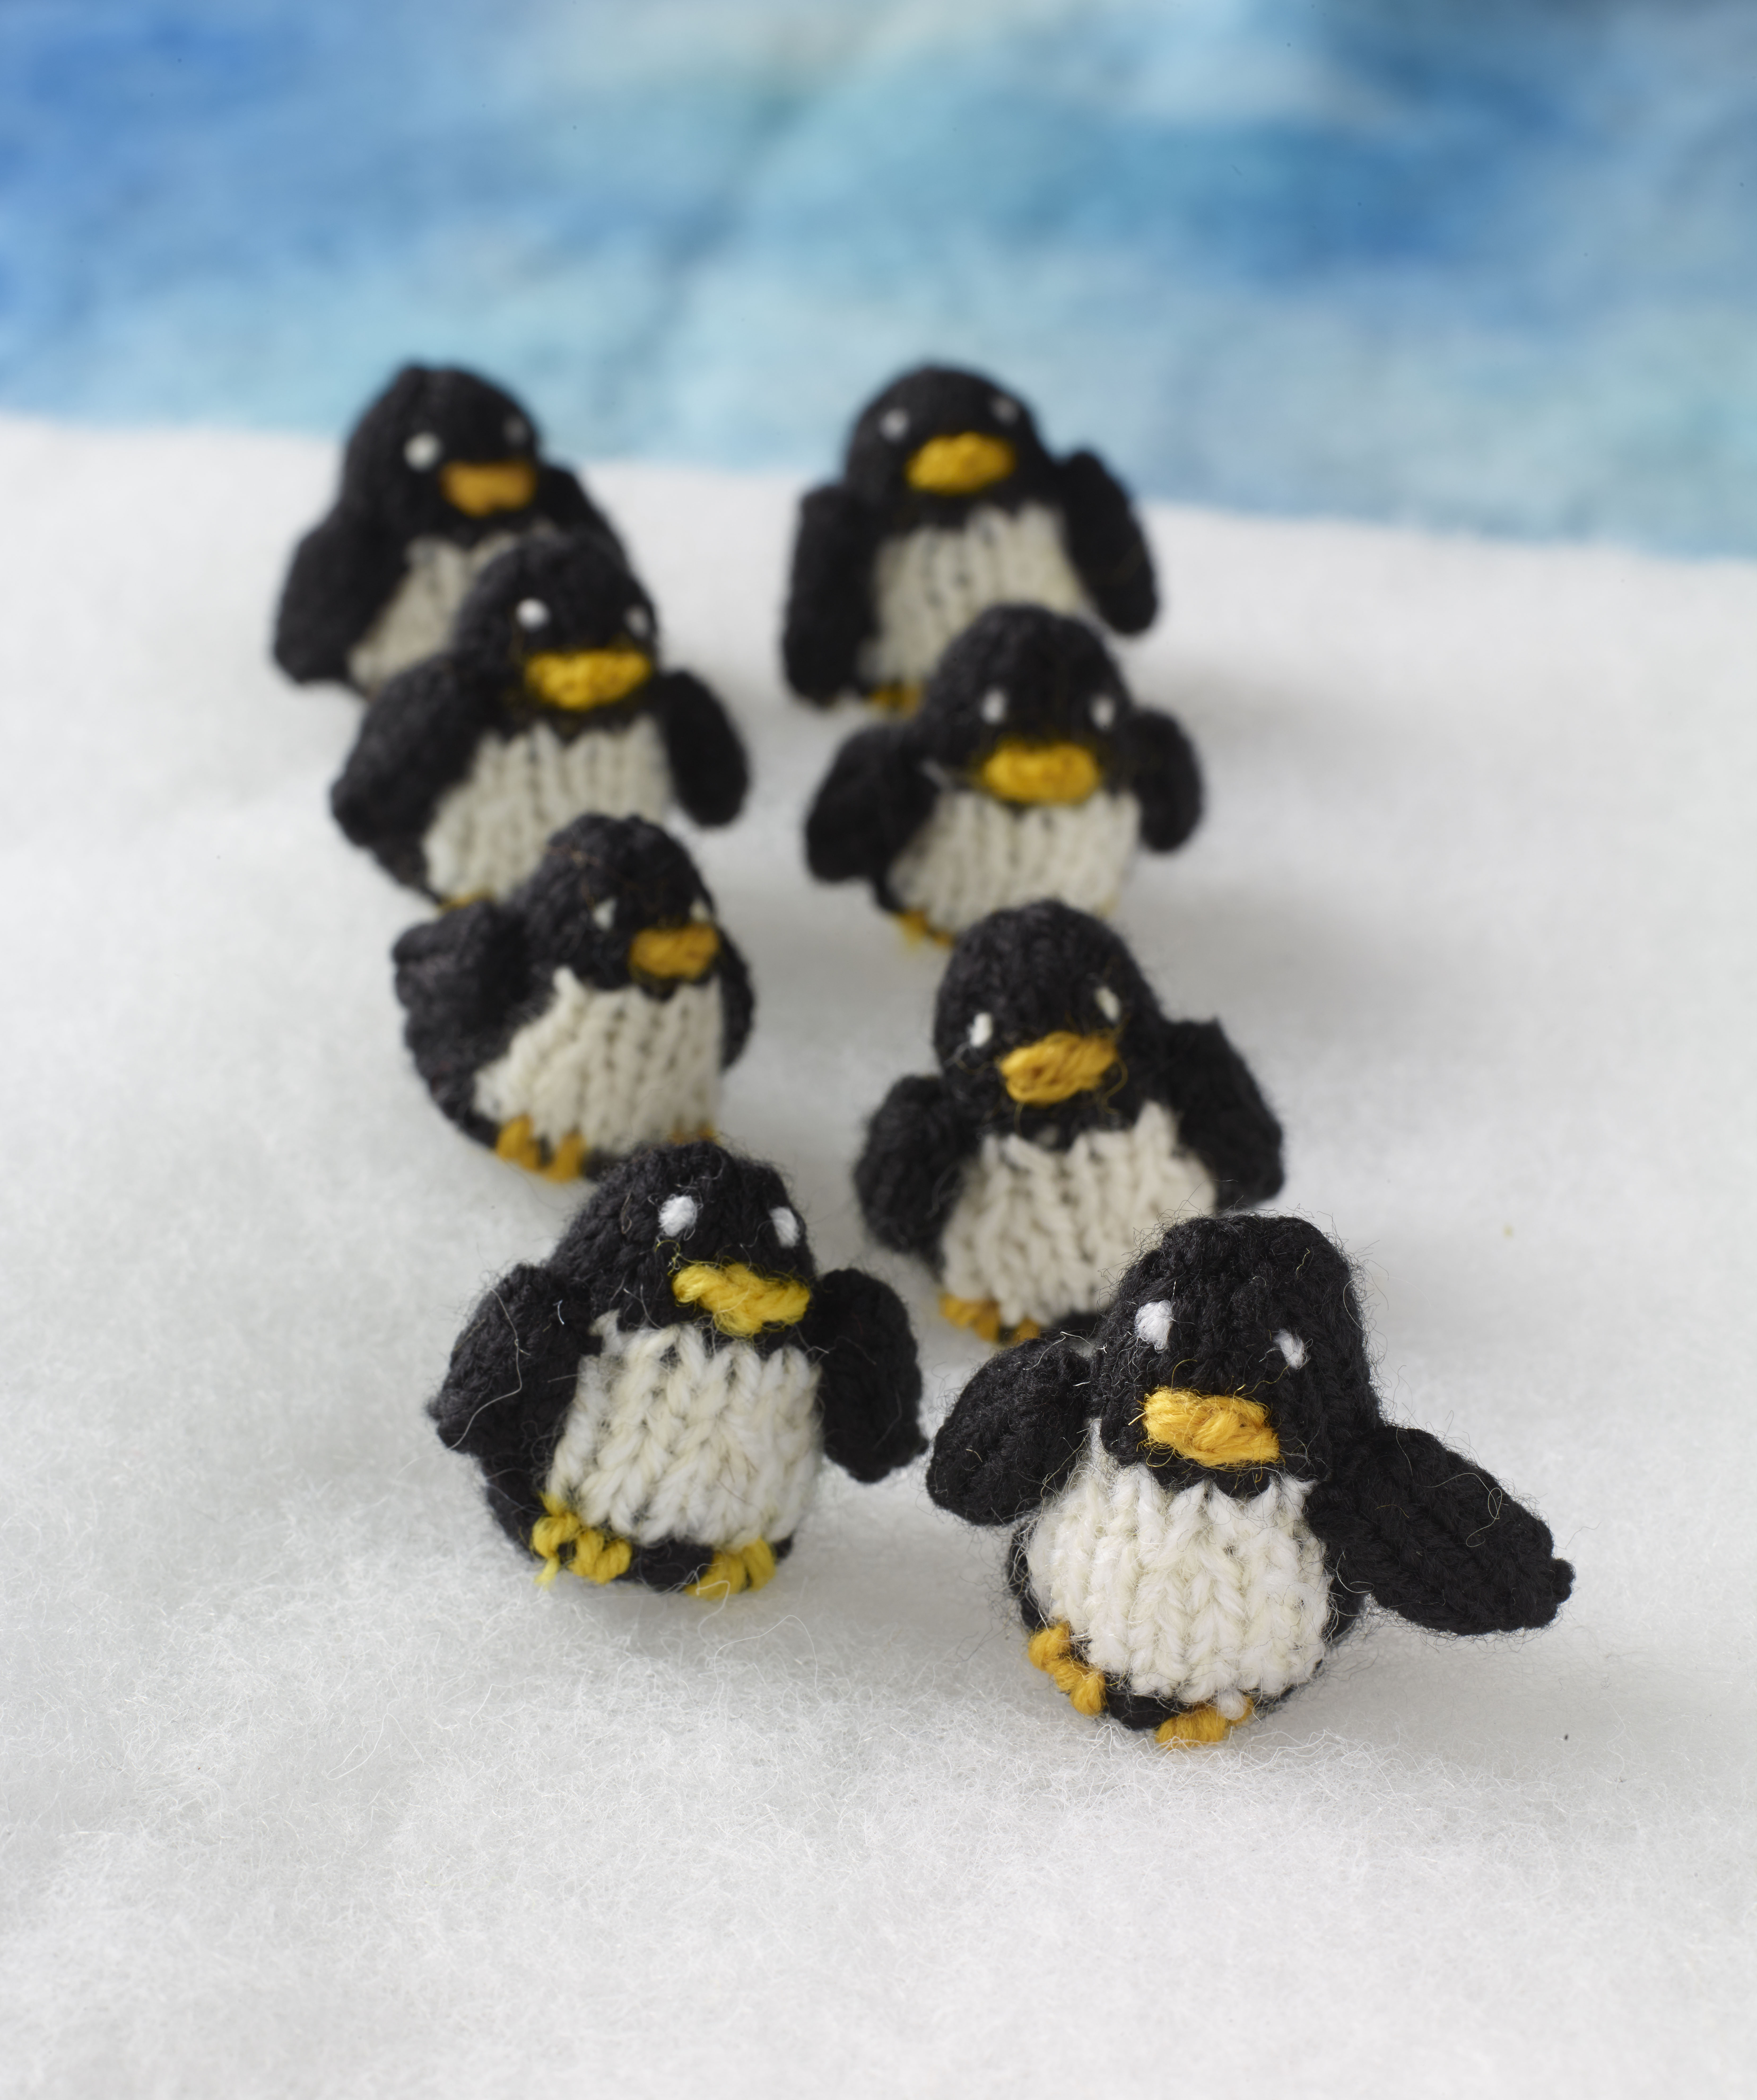 12 Days of Penguin... On the first day of Penguin